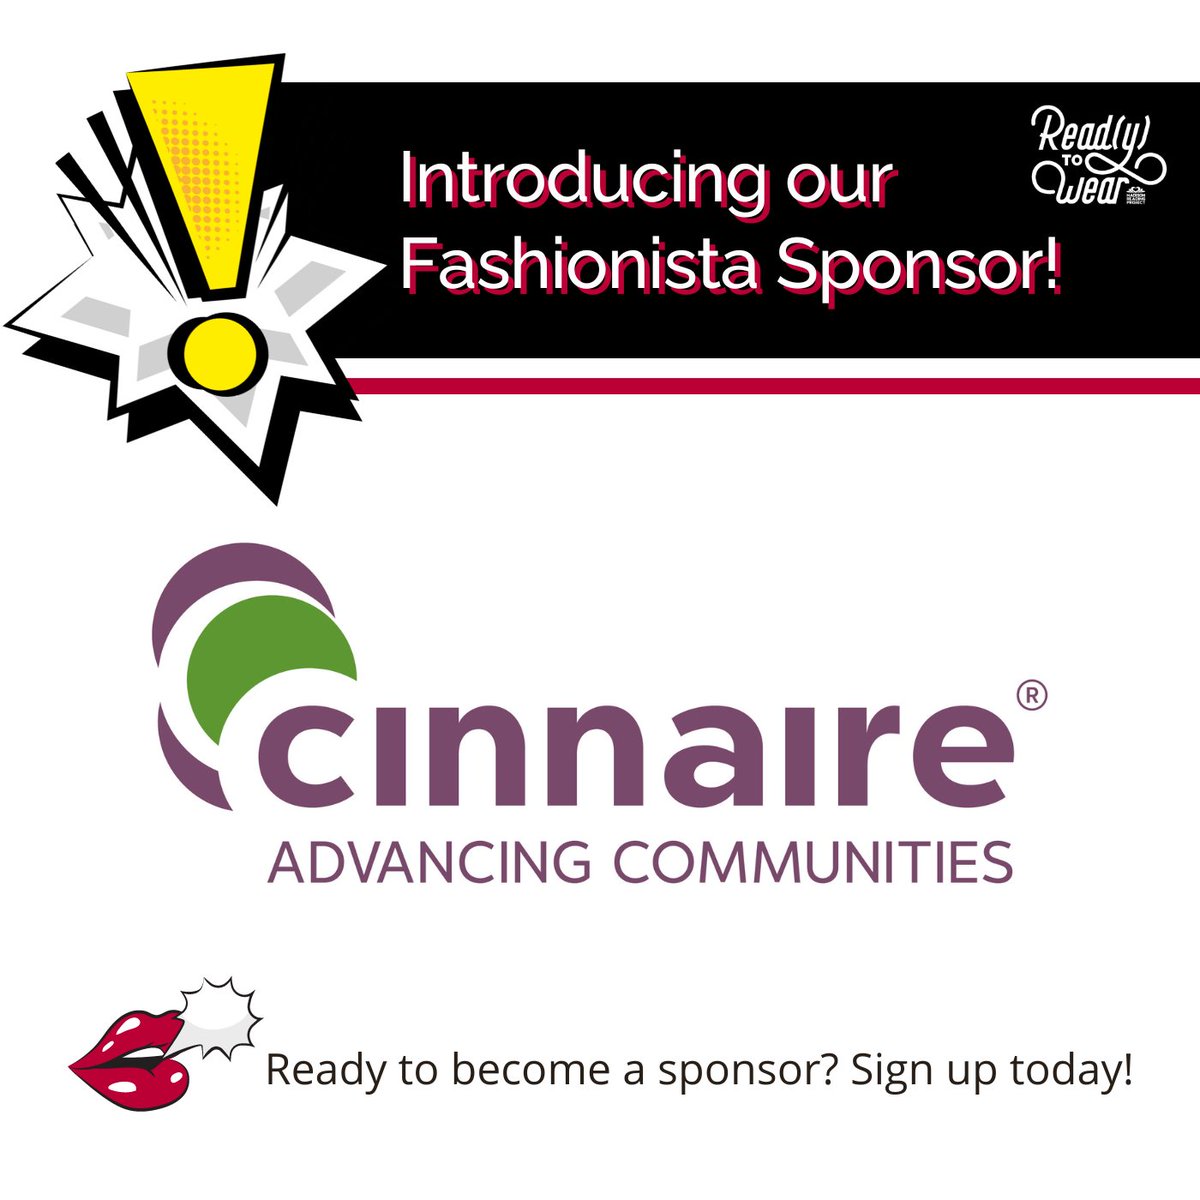 🎉 We are delighted that @cinnaire has signed up as a Fashionista Sponsor for our 2024 Read(y) to Wear event on June 12th!⁠
⁠
⭐️ Find more information on our website at madisonreadingproject.com/readytowear
⁠
#PaperFashion #FashionFundraiser #MadisonWI #NewBookFeeling